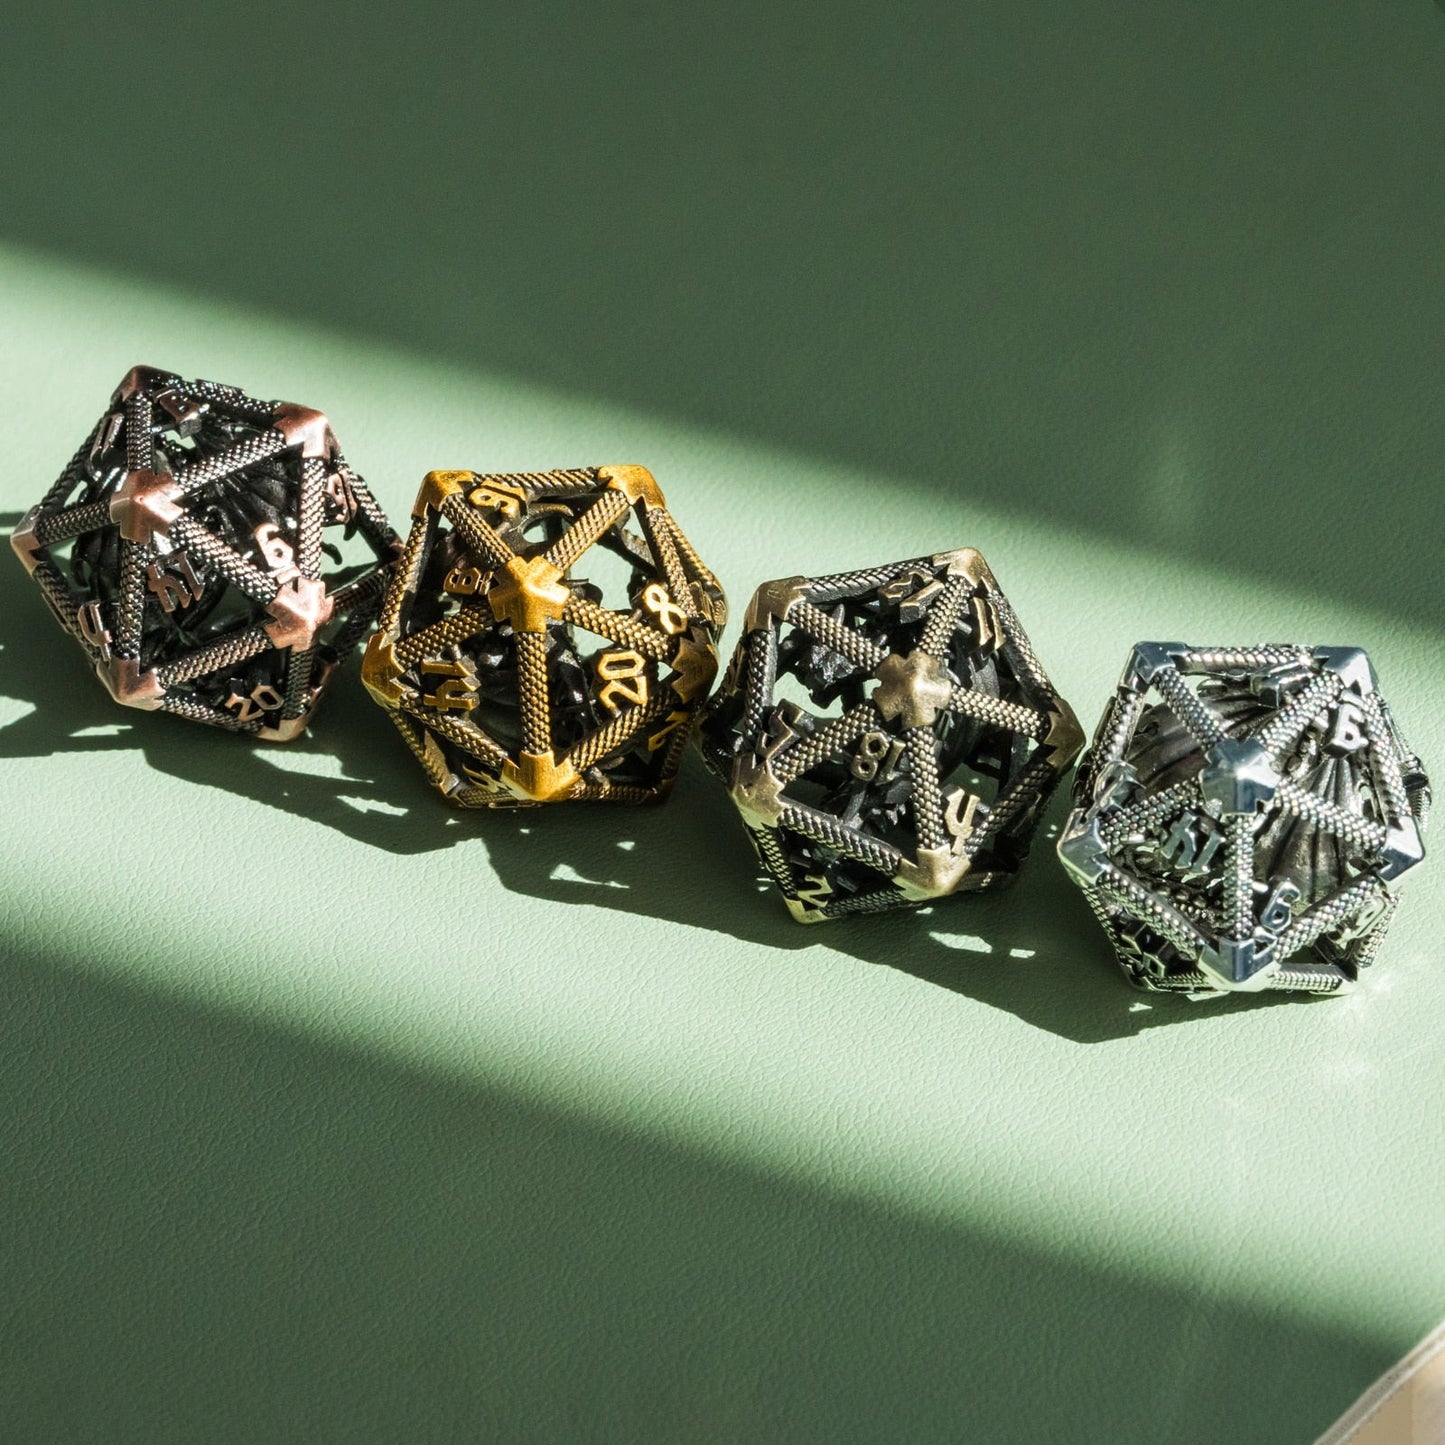 four hollow metal d20s in a beam of sunlight